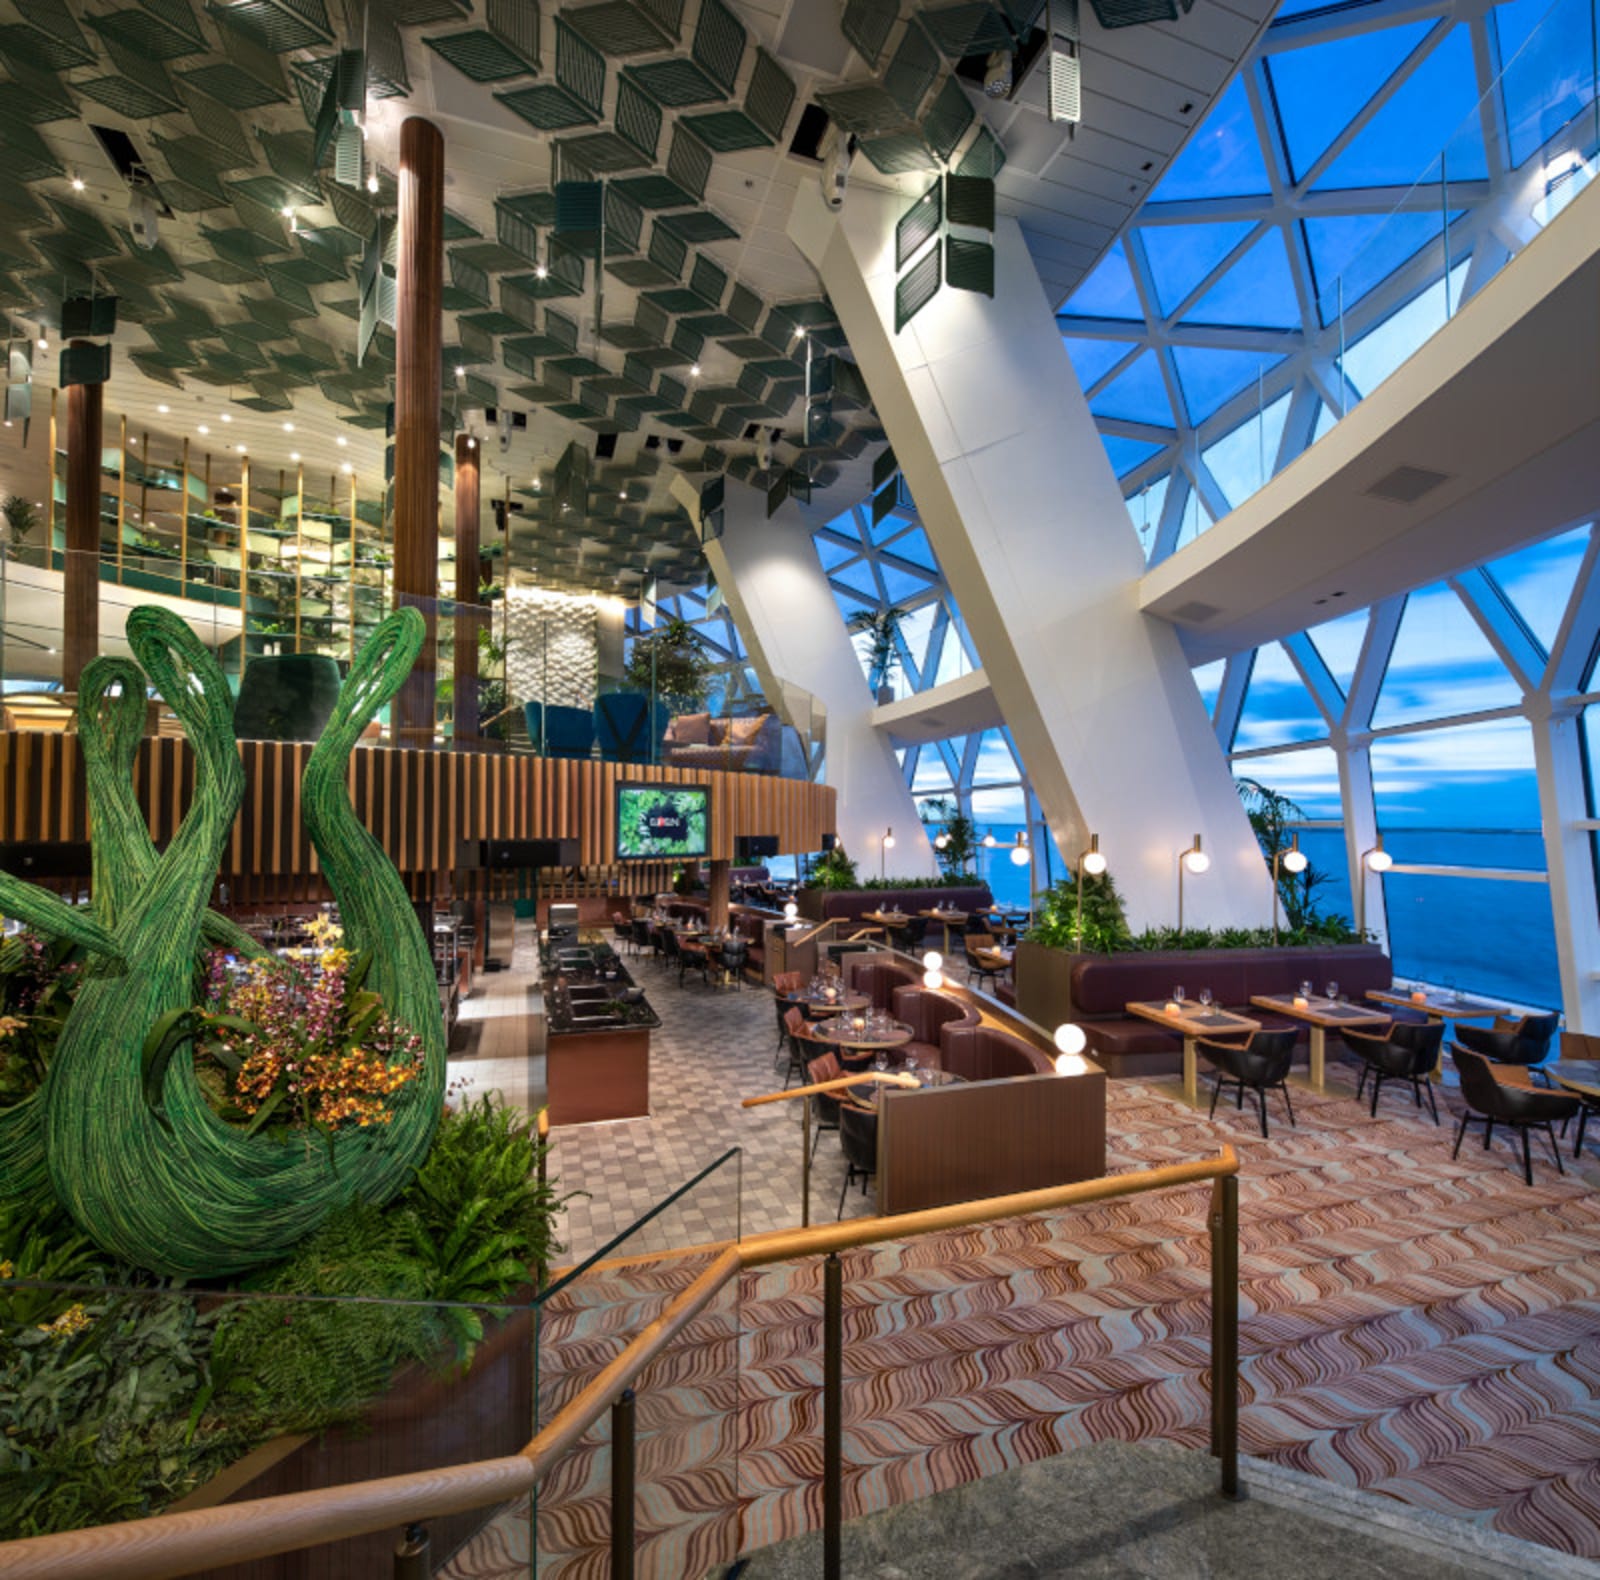 Cruise ship restaurant - open kitchen, open triangle windows and leather seating lit by round warm lights